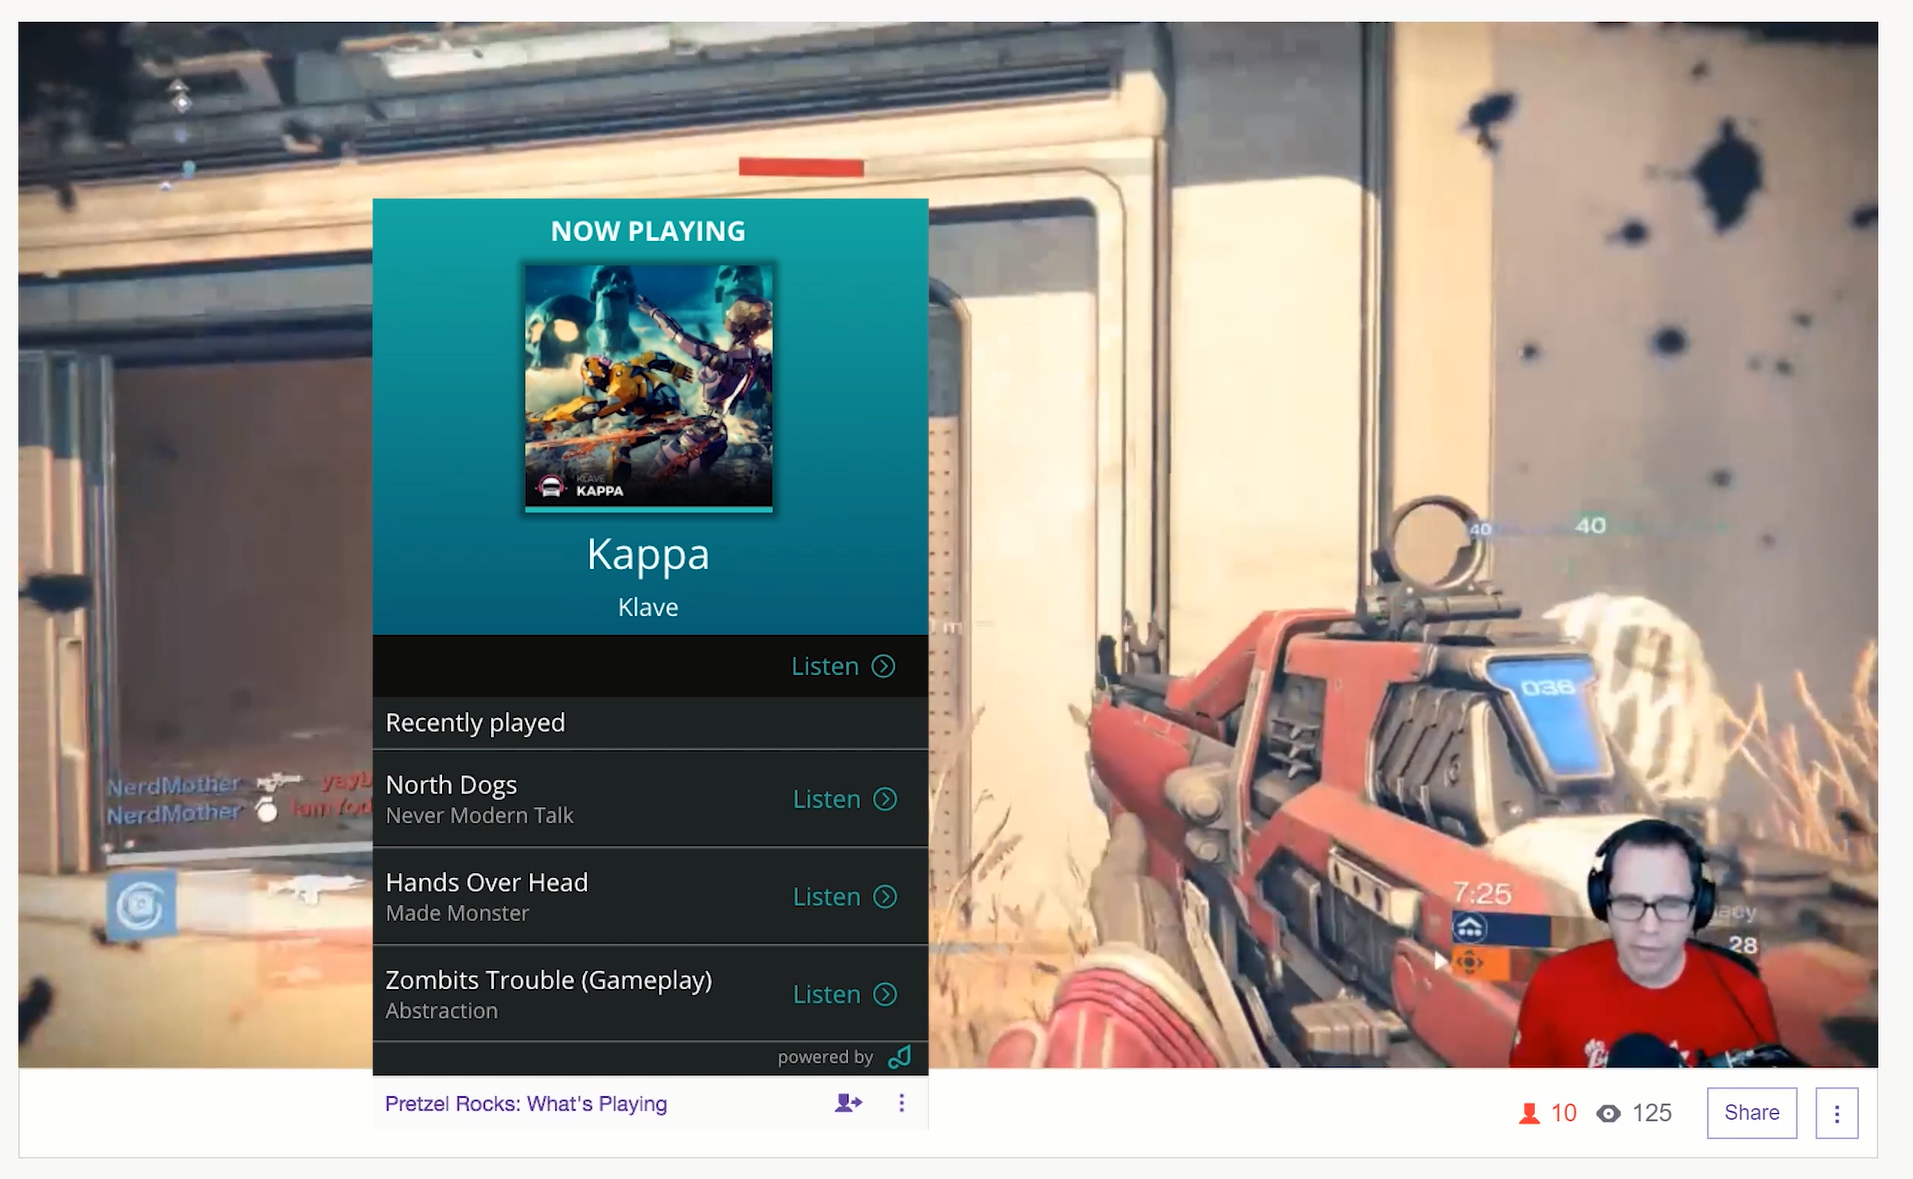 Twitch unveils a suite of new tools to help creators grow their channels and make money